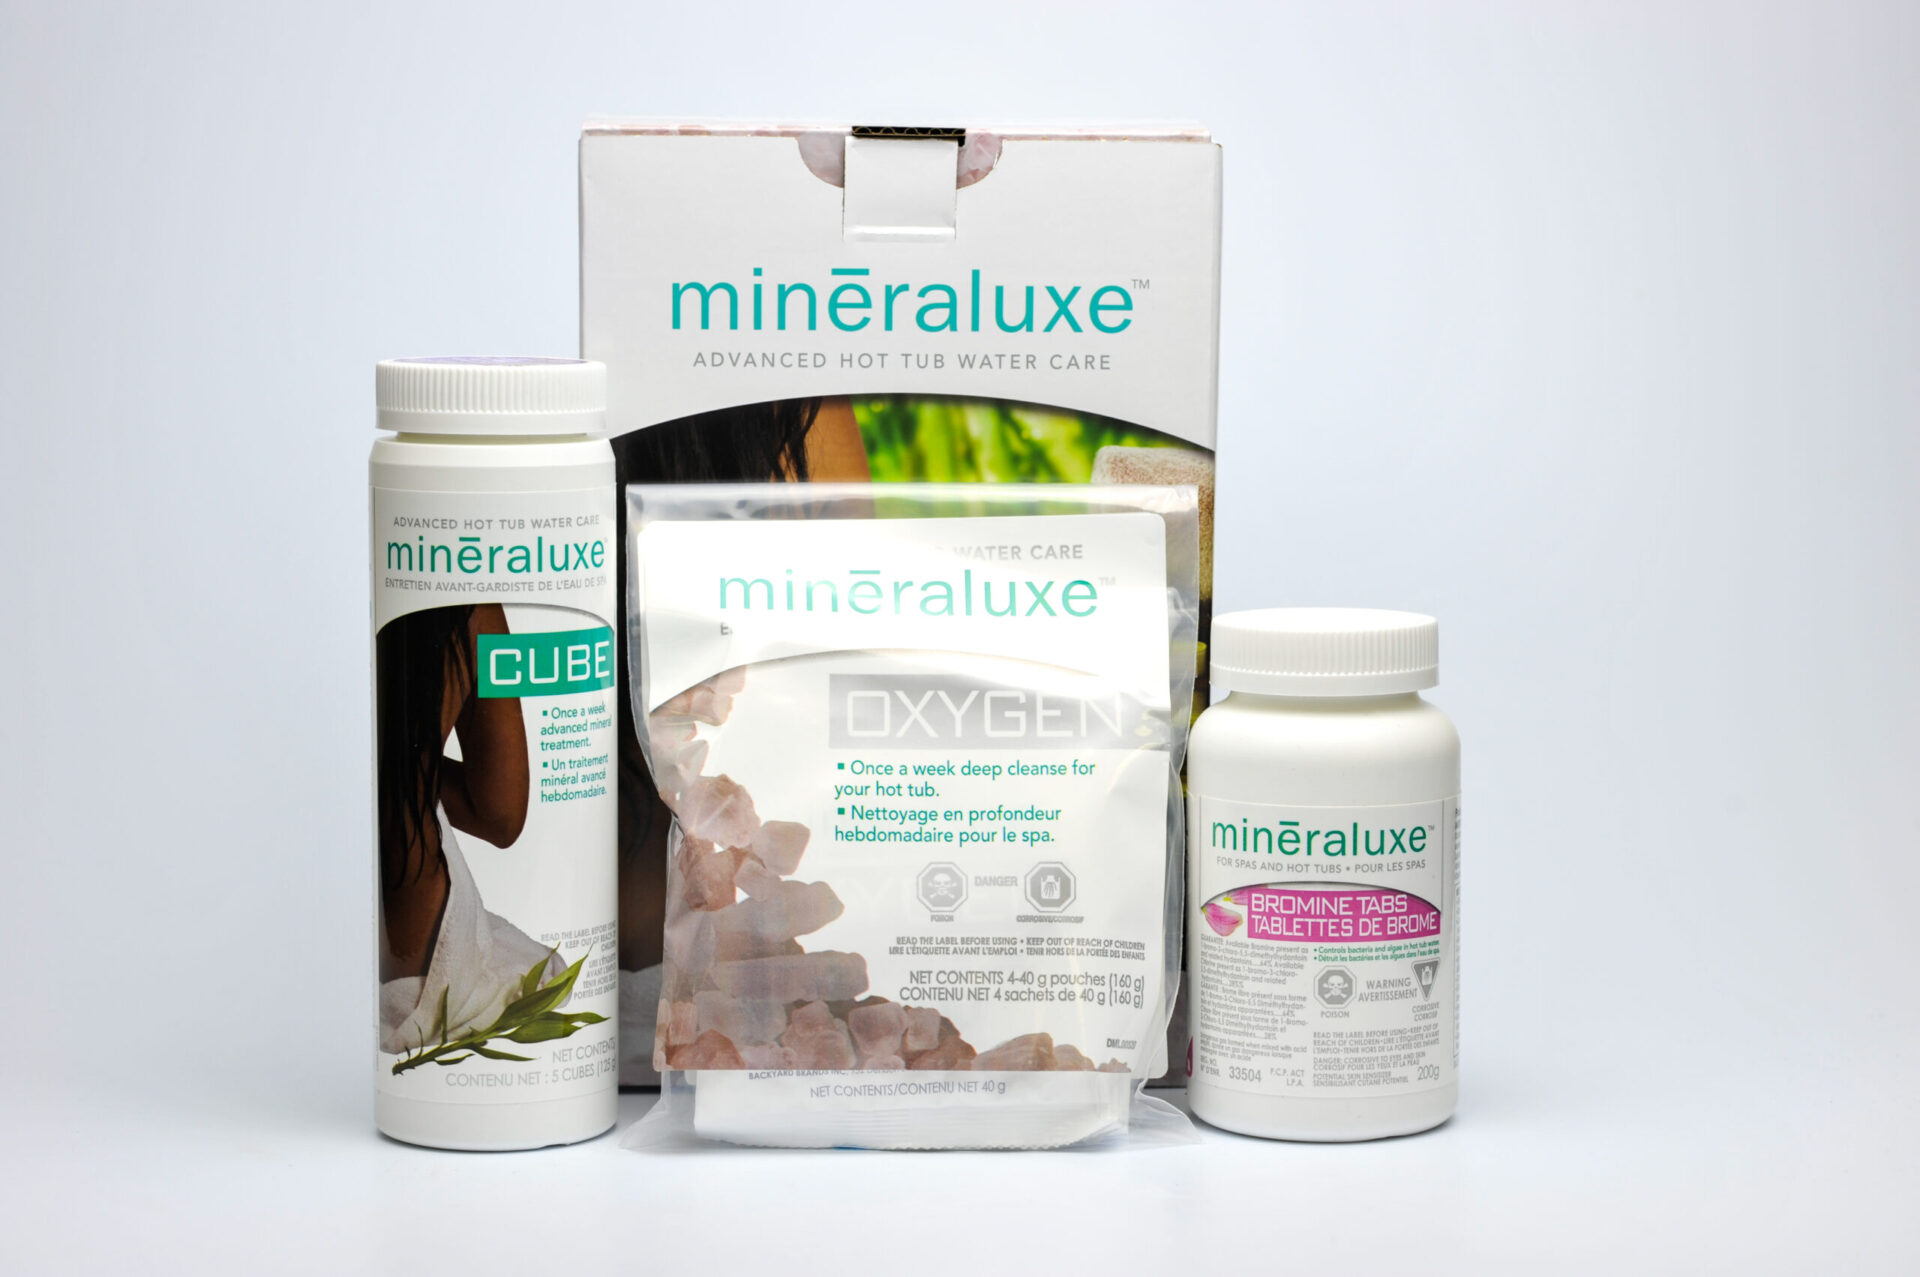 Mineraluxe One Month Bromine Kit scaled - Mineraluxe One Month Bromine Kit